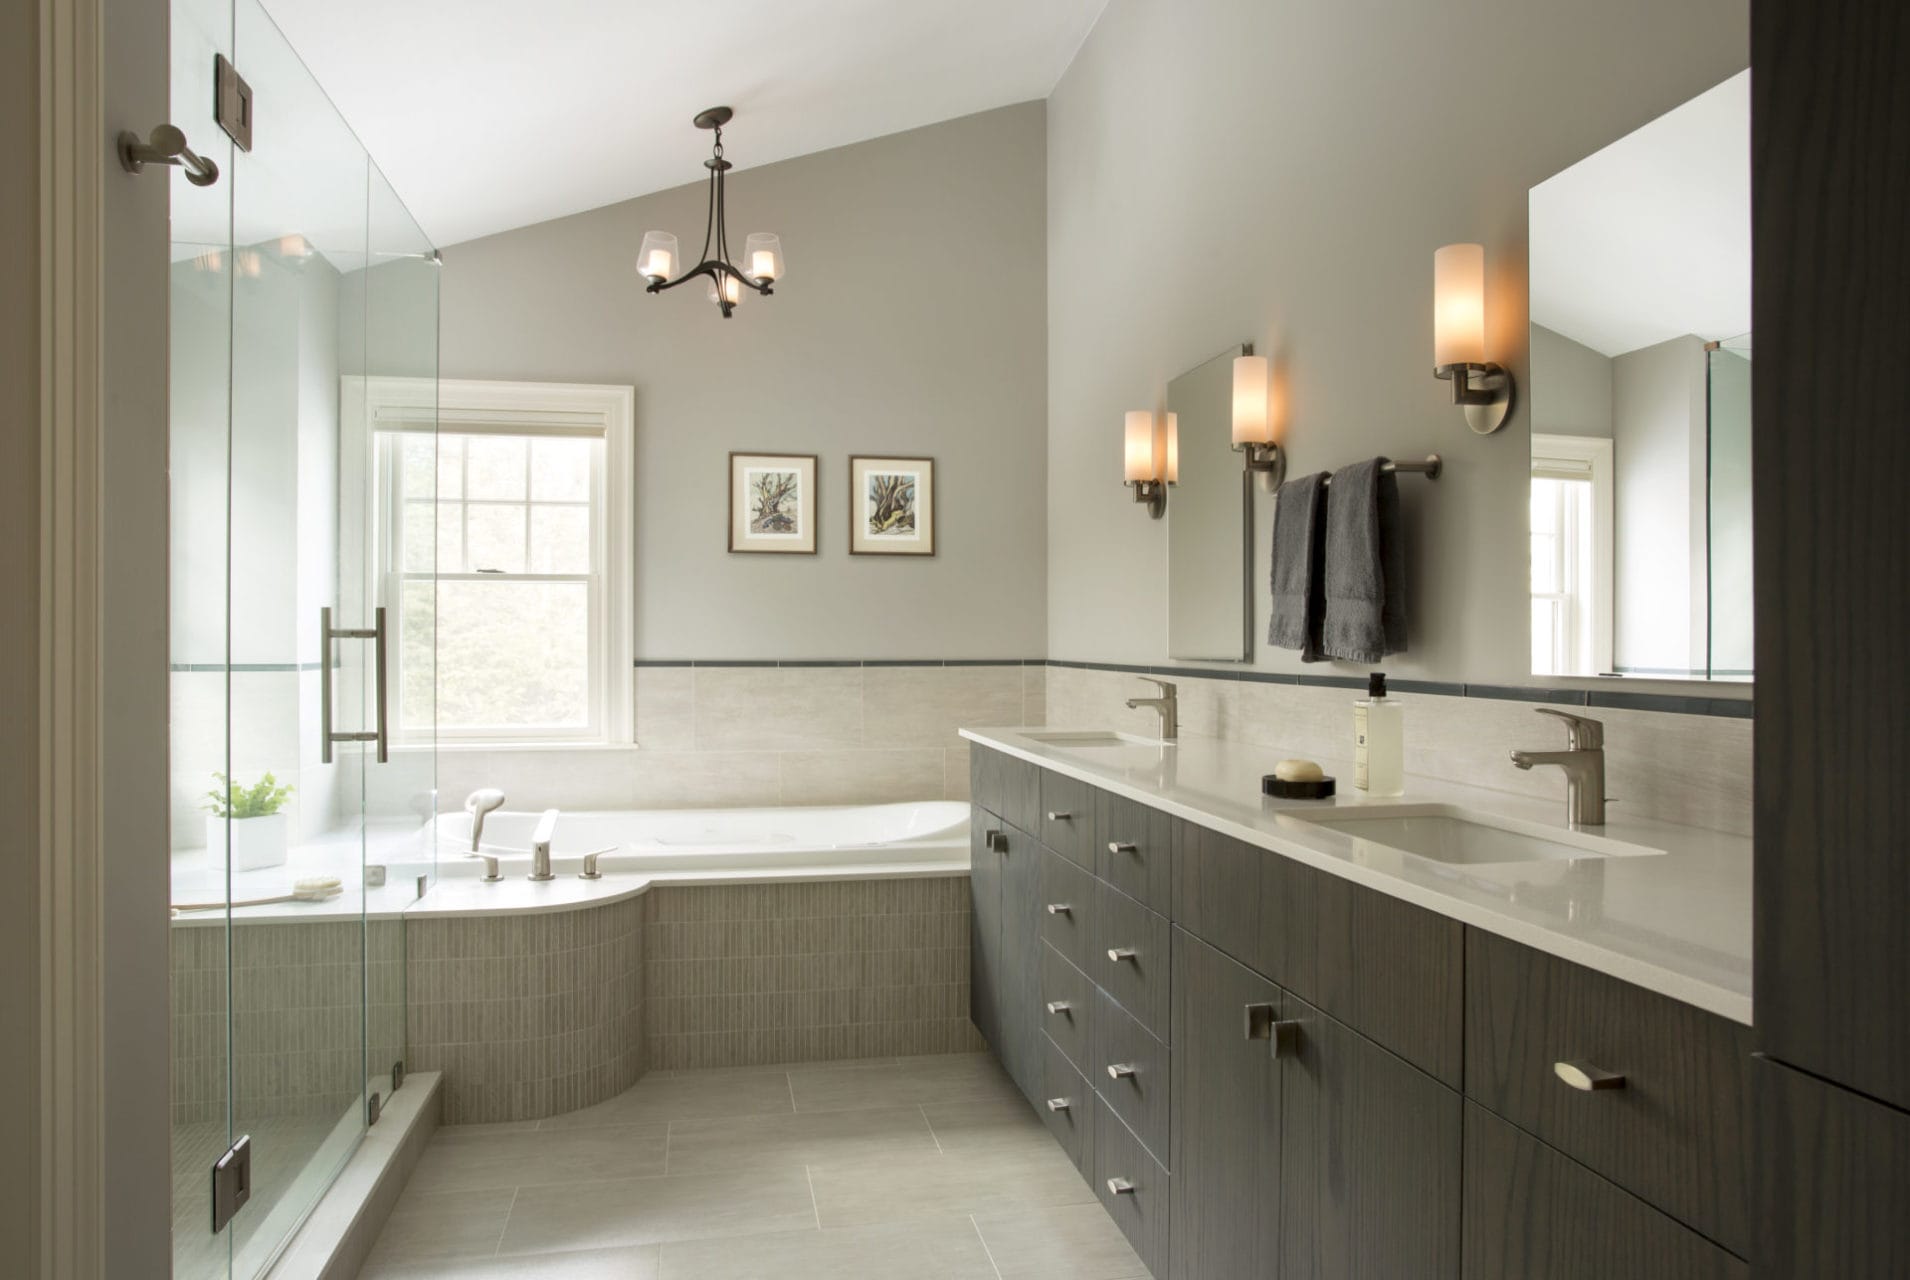 7 Stunning Master Bathroom Layout Ideas for 2023 [Pictures]